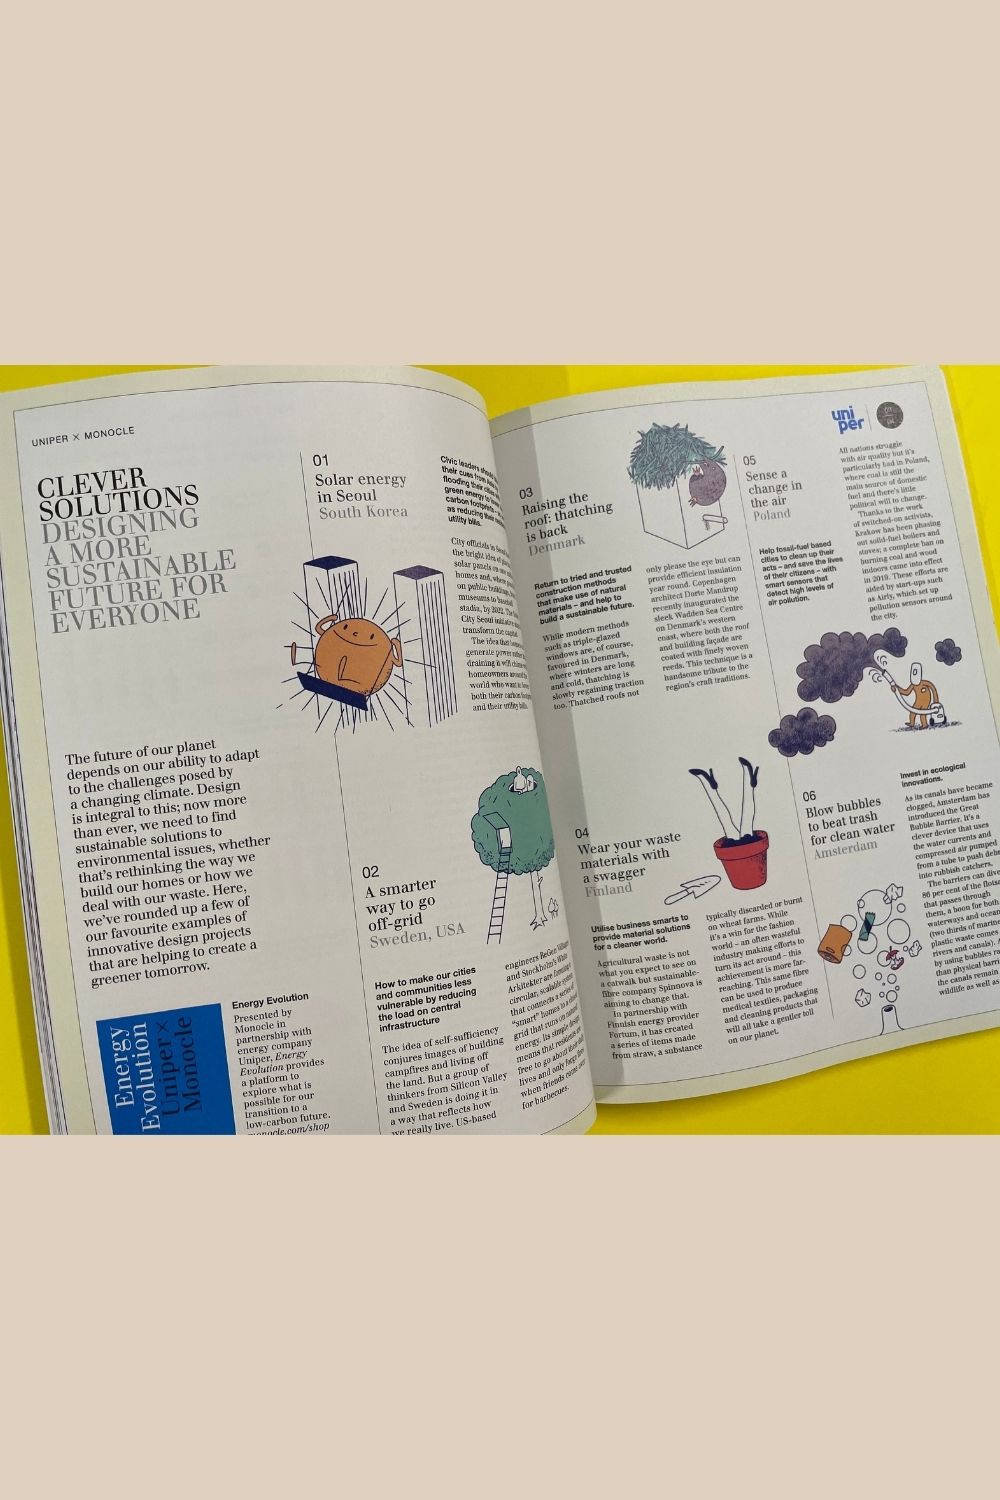 Inside issue 143 of Monocle Magazine - Design Solutions